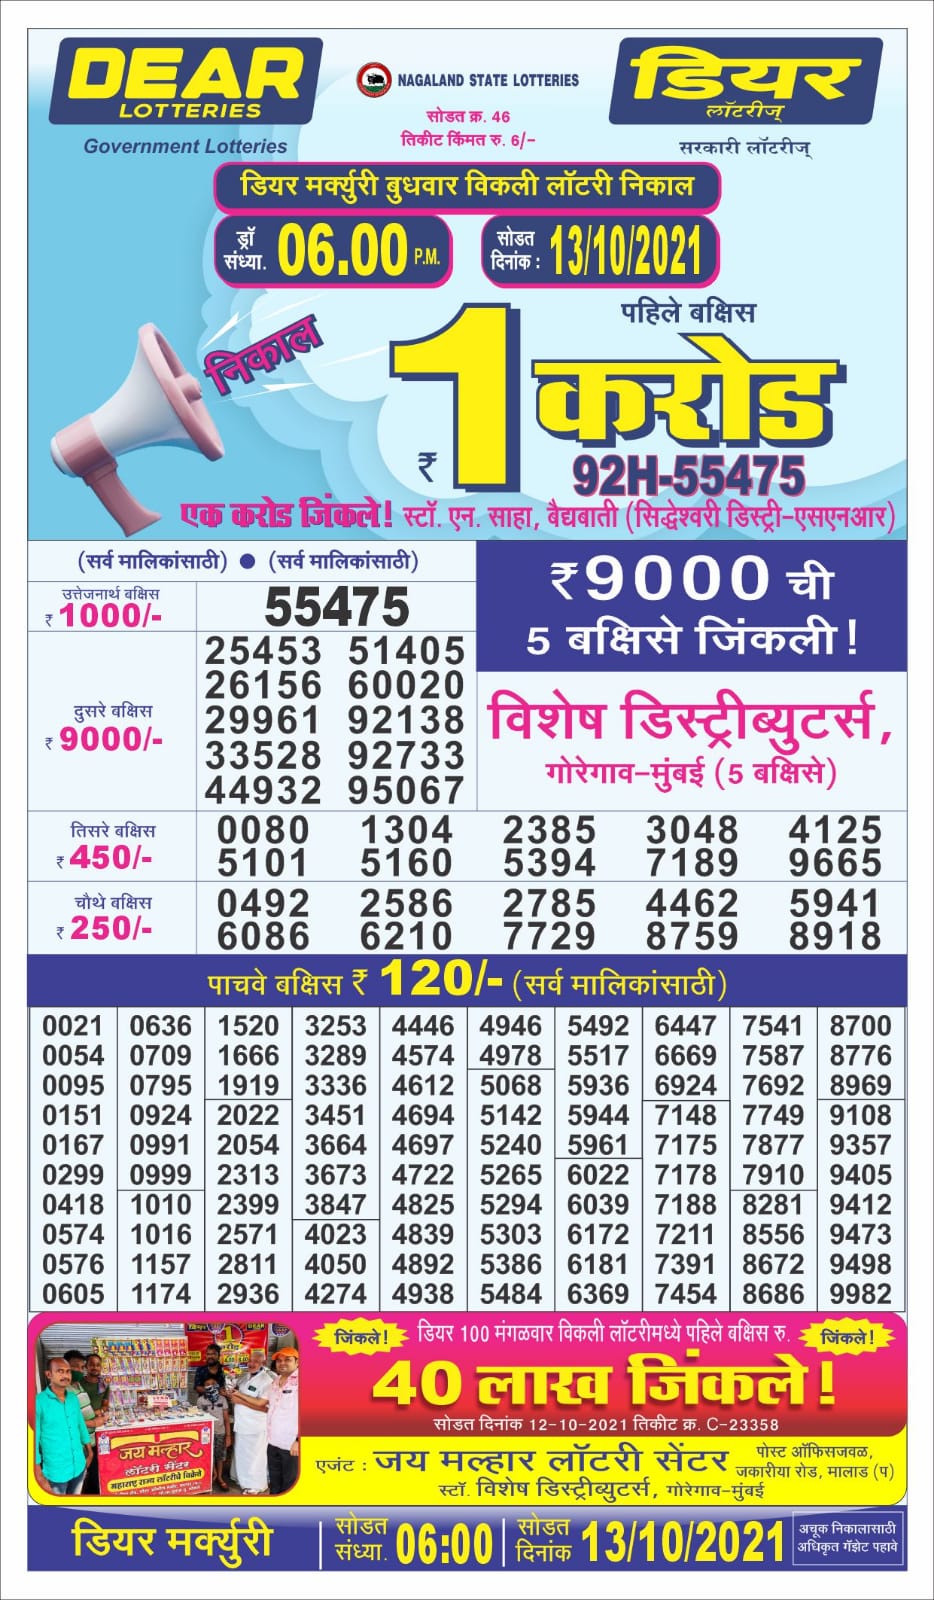 Dear Lottery Nagaland State Lottery Today 6.00 PM 13-10-2021